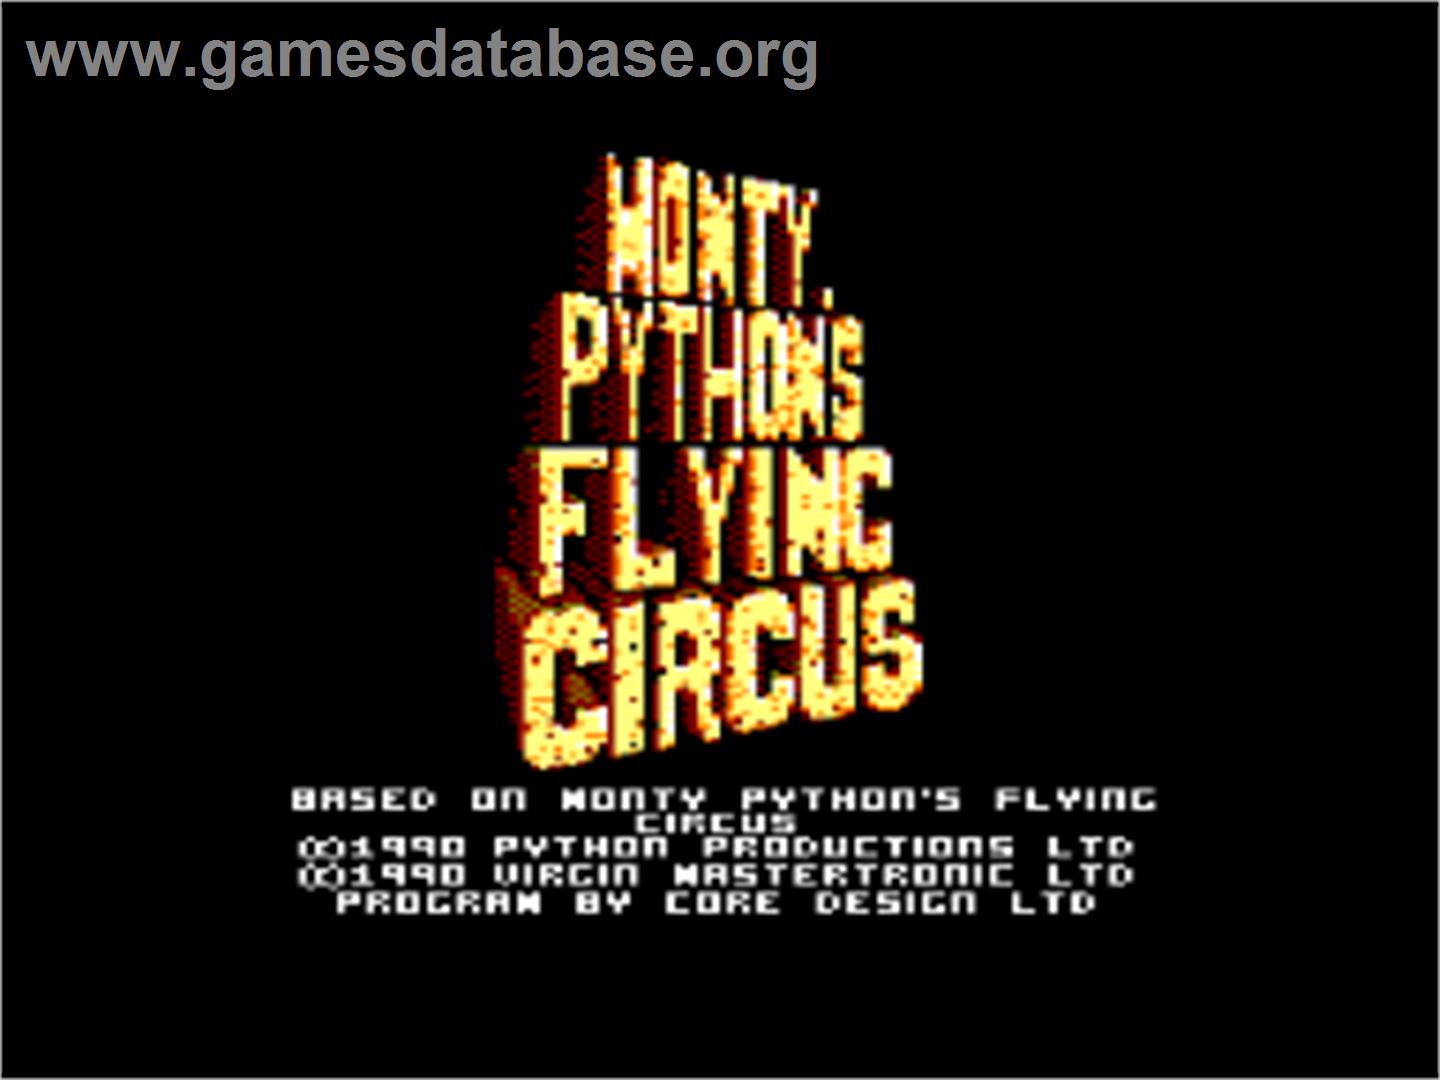 Monty Python's Flying Circus - Amstrad CPC - Artwork - Title Screen